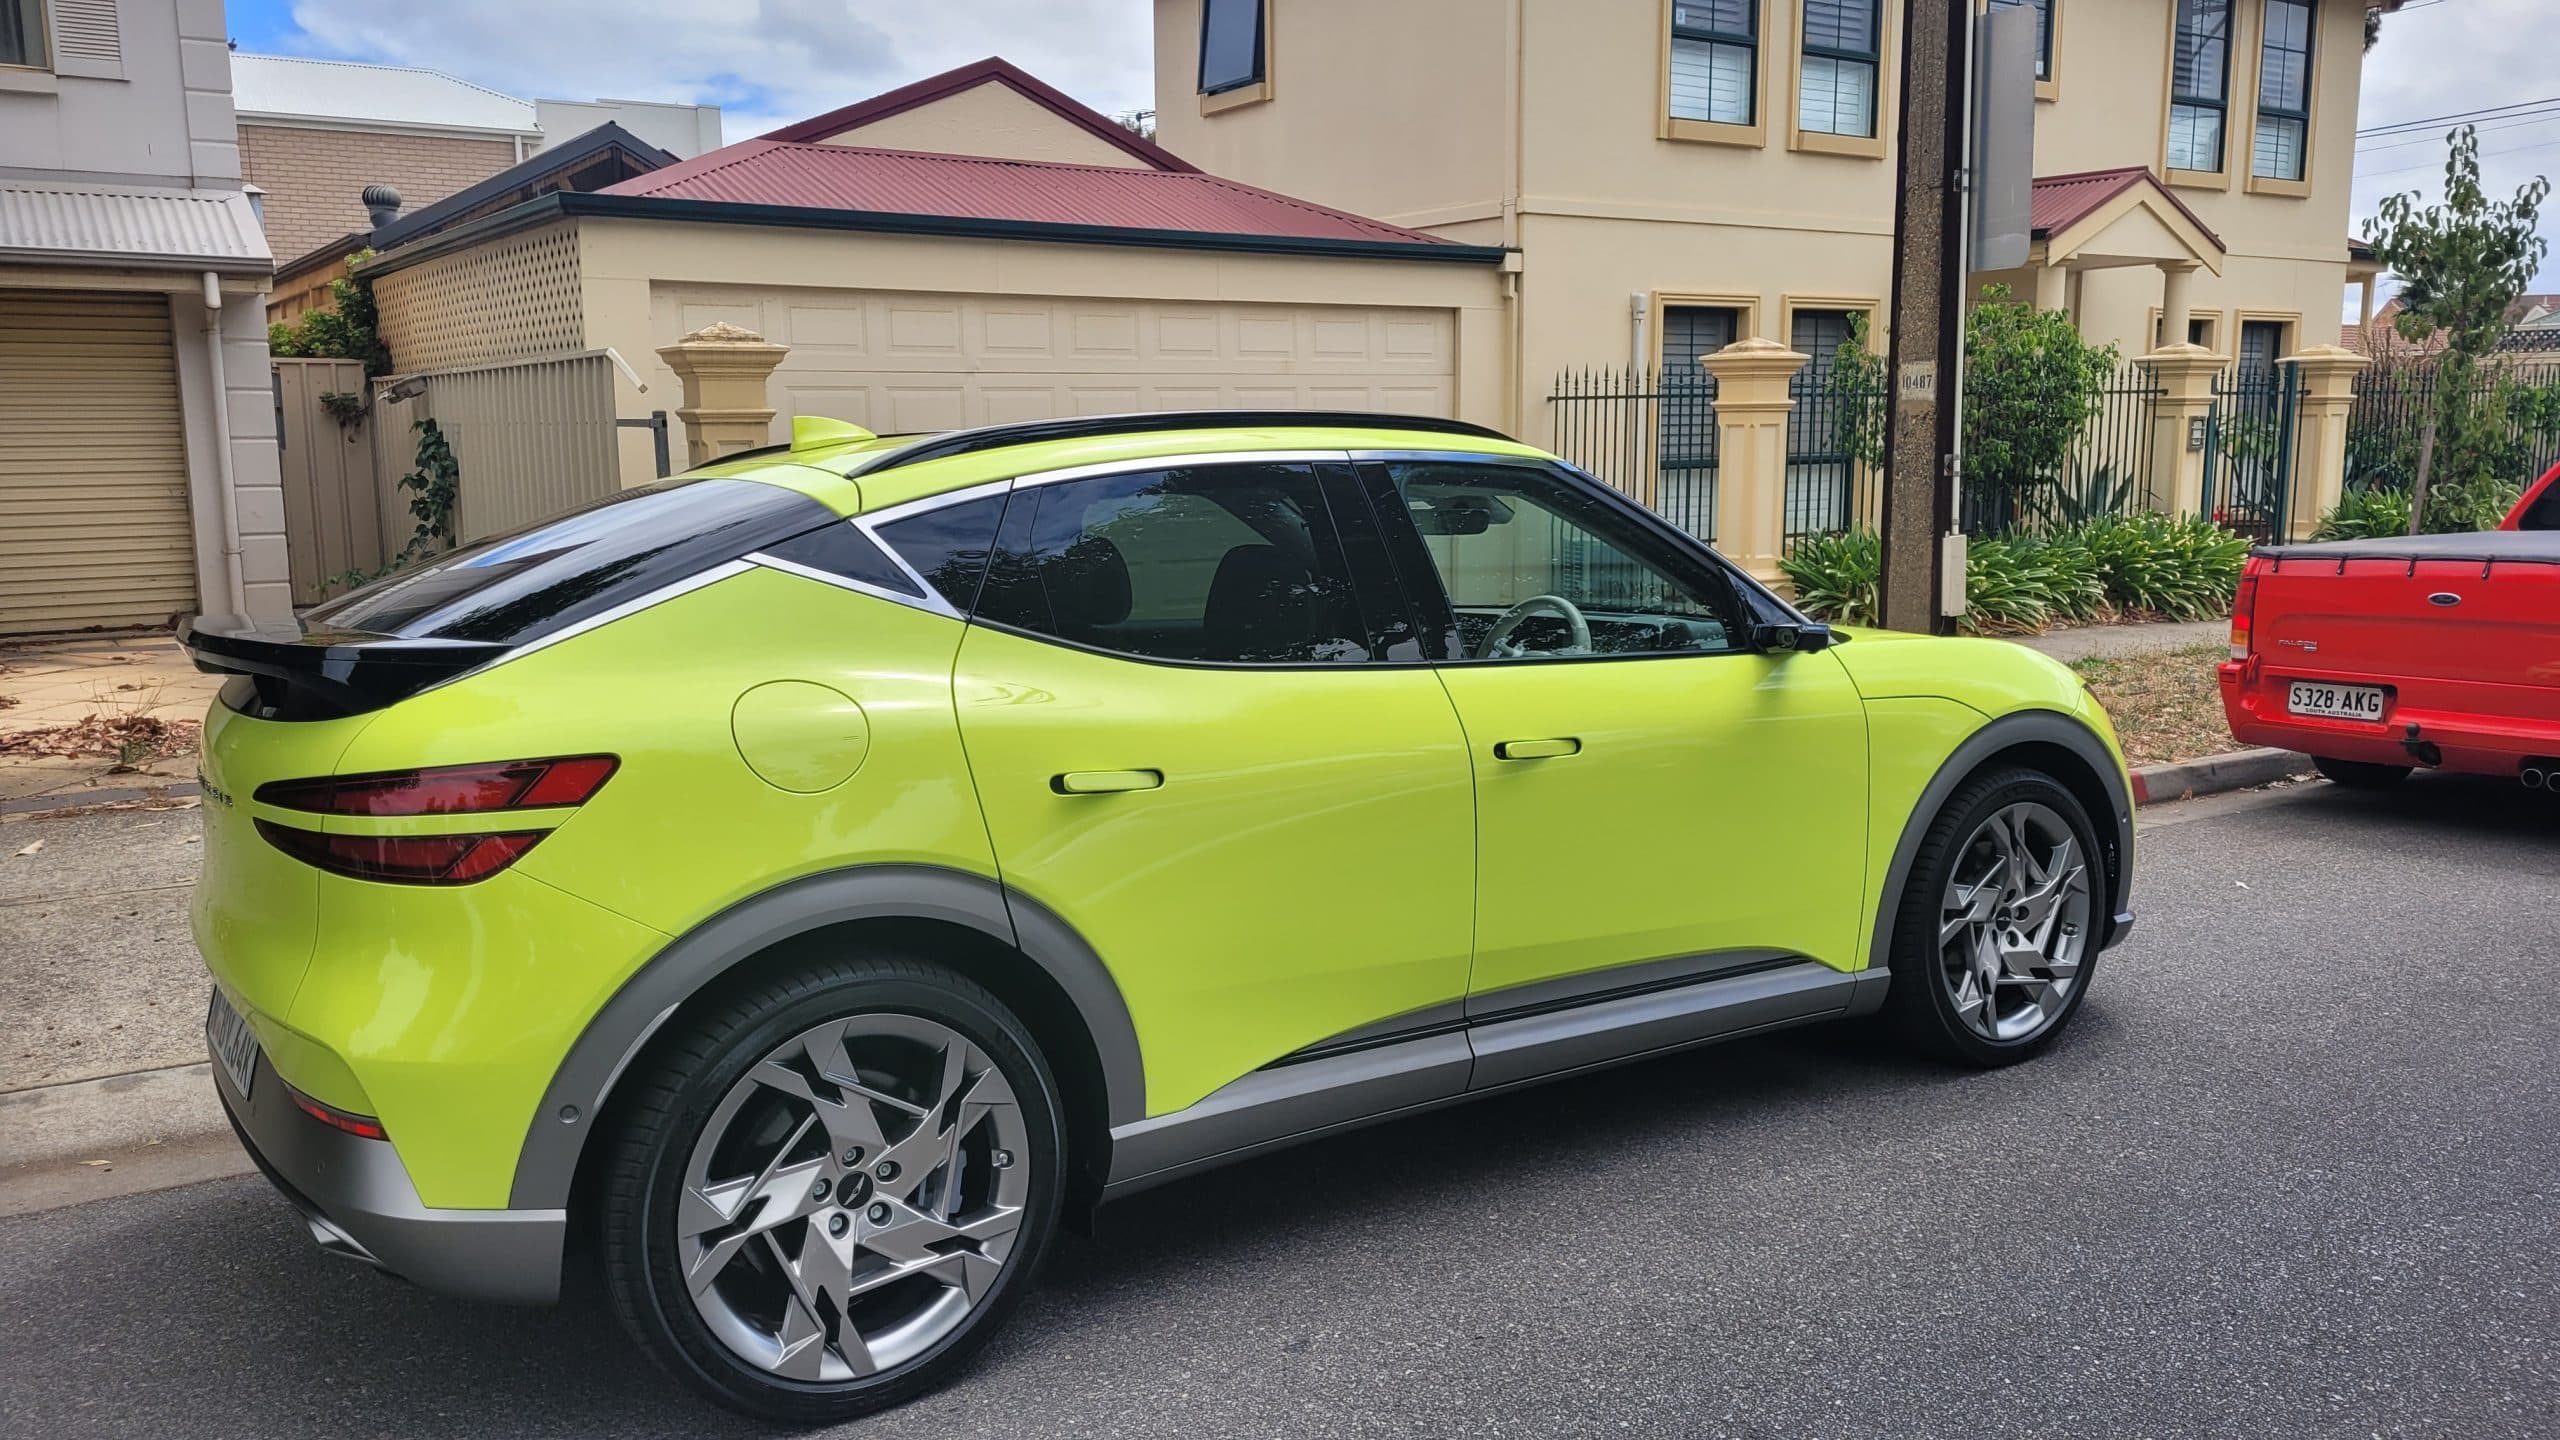 Sao Paulo Lime green Genesis GV60 right hand side view from back